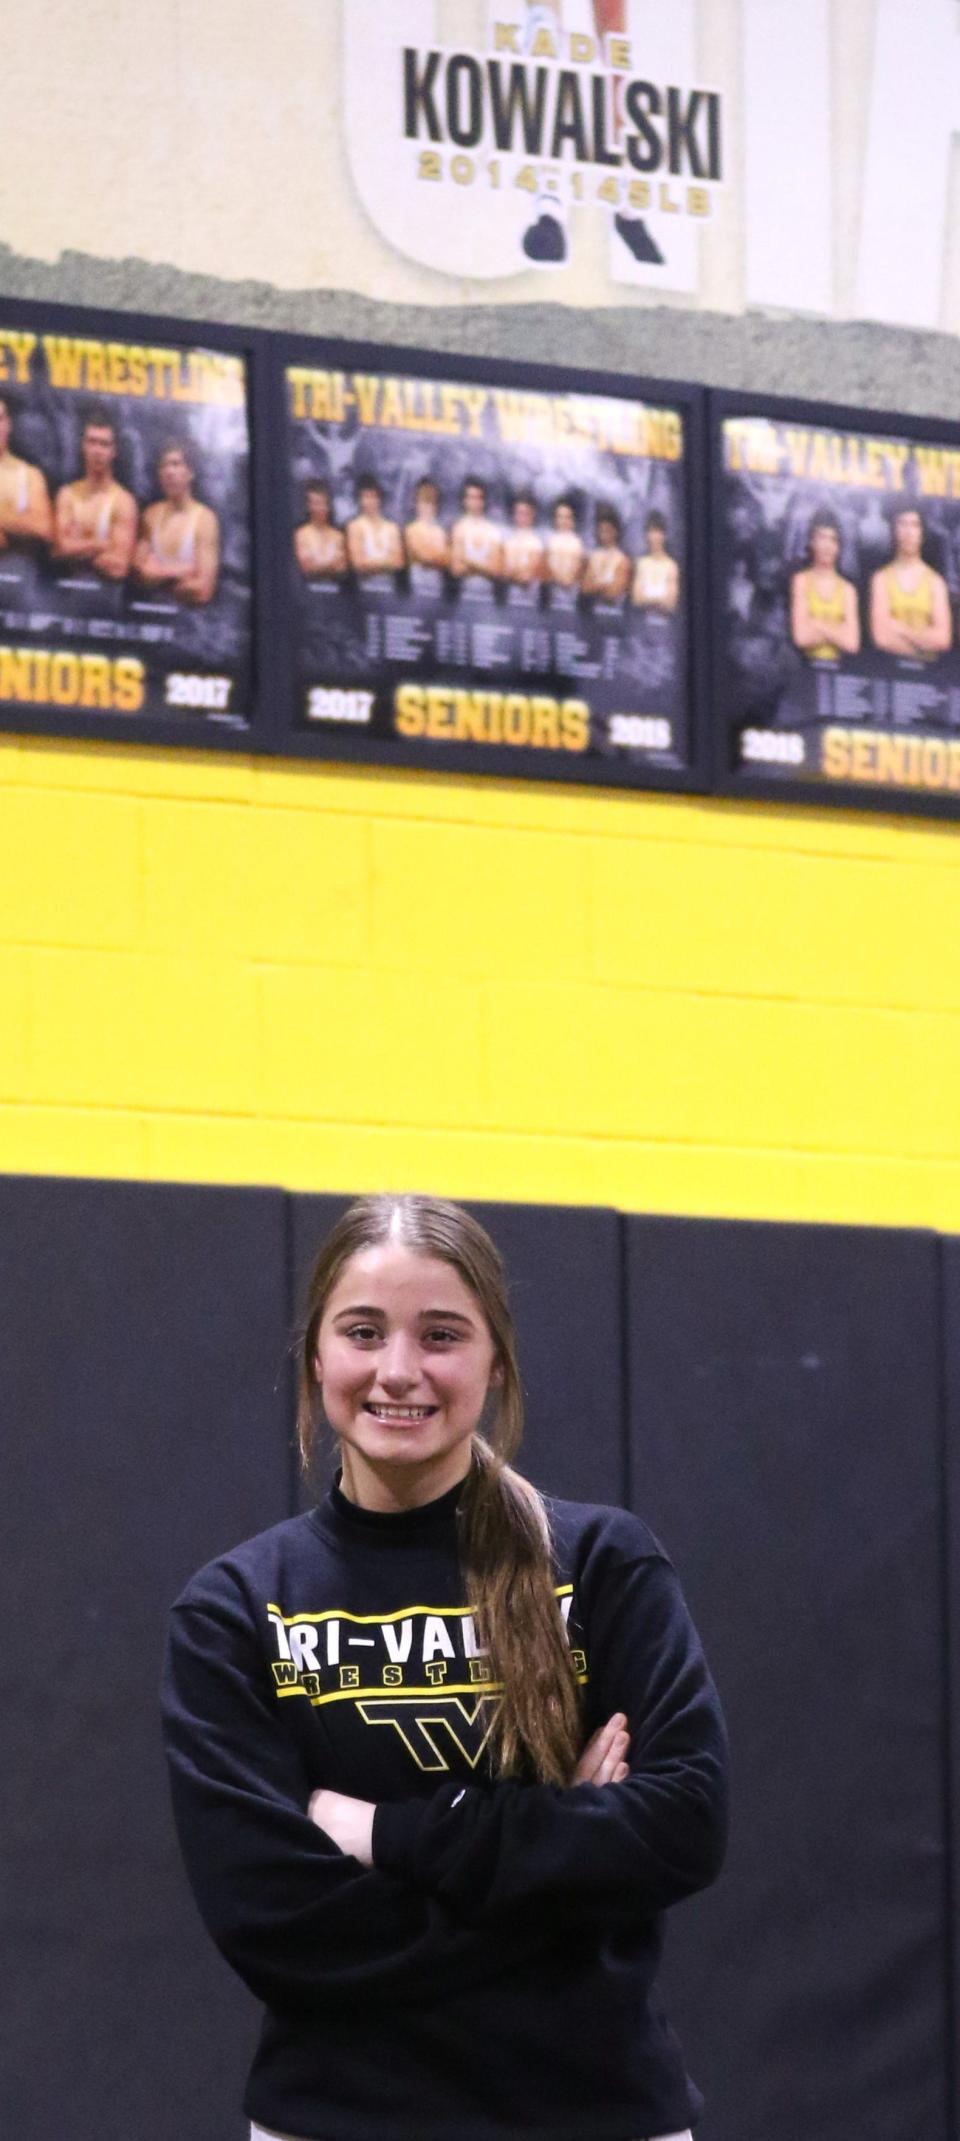 Tri-Valley sophomore Kandice Spry will compete in her first high school state tournament this weekend. She is among four area girls who will be at the event, as she hopes to join Kade Kowalski as the school's only state wrestling champions.